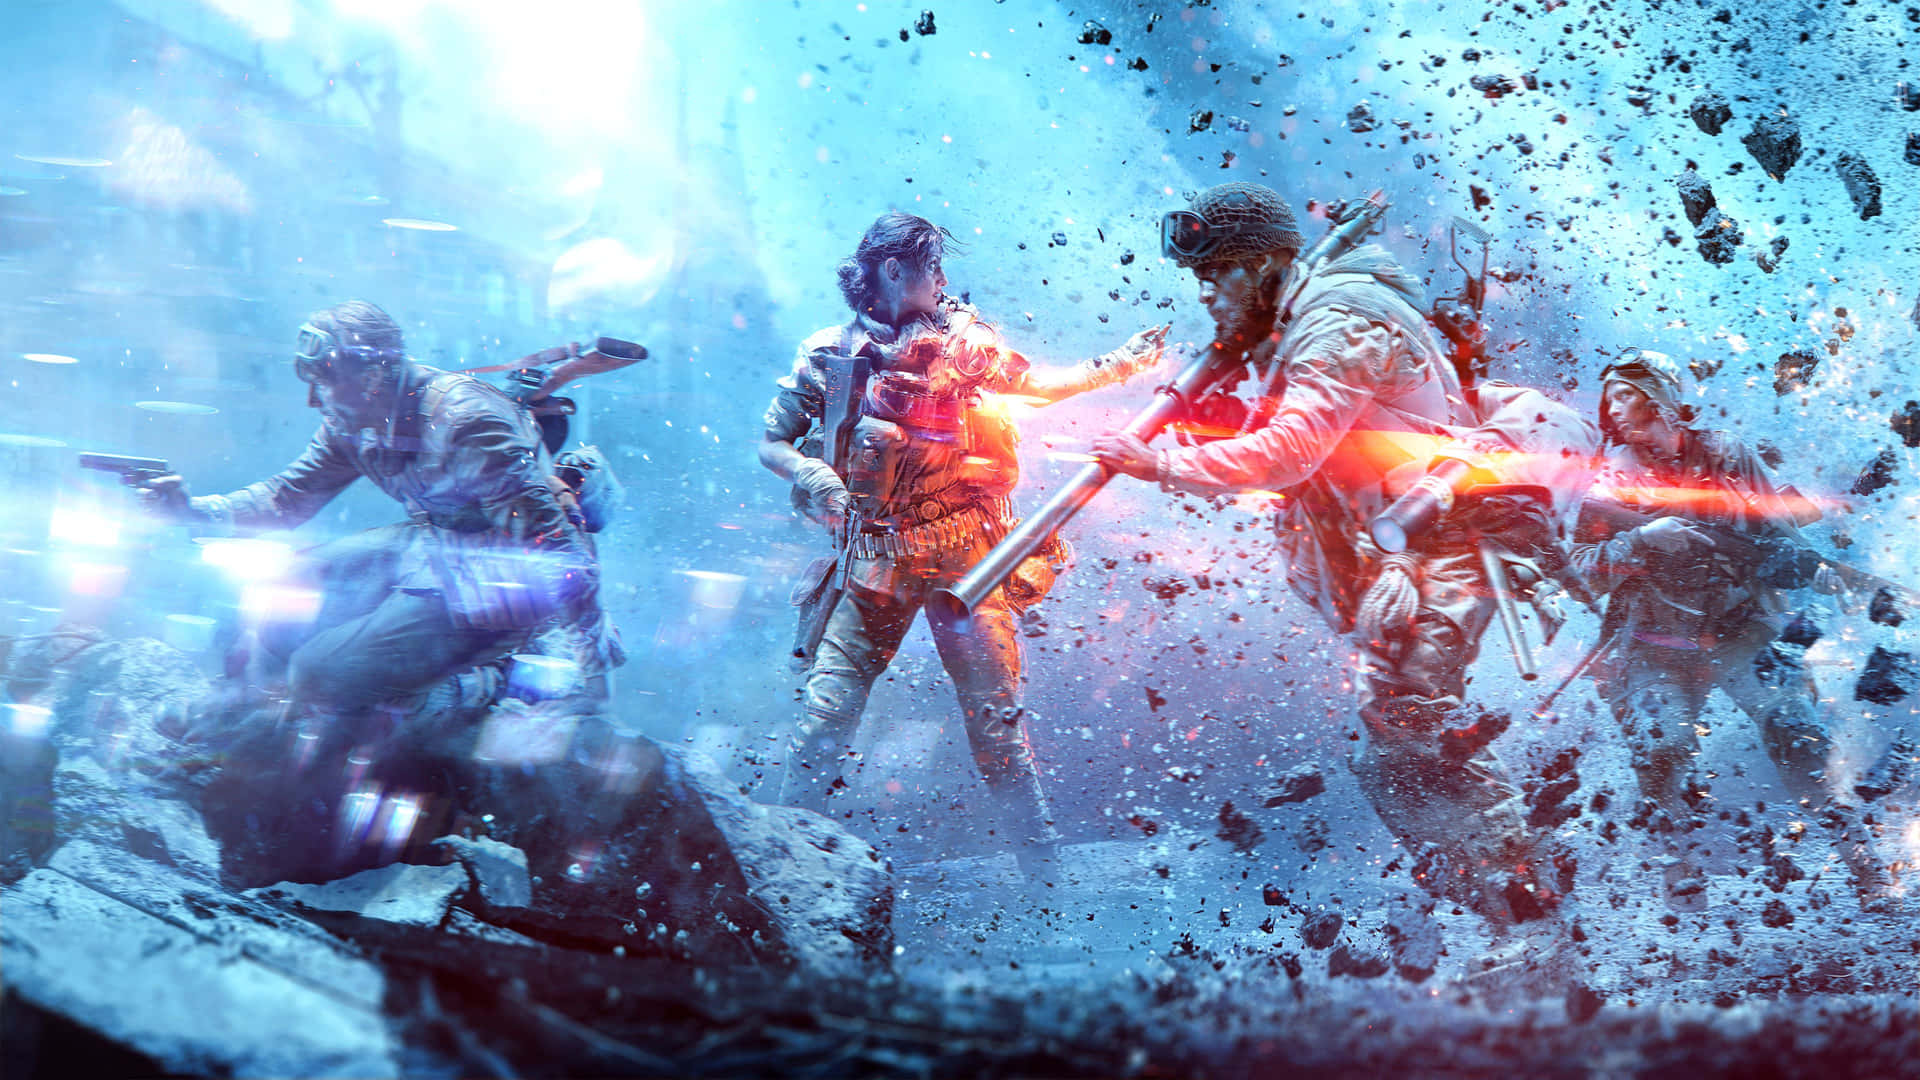 Fire up the 4k Battlefield with an Explosive Display Wallpaper